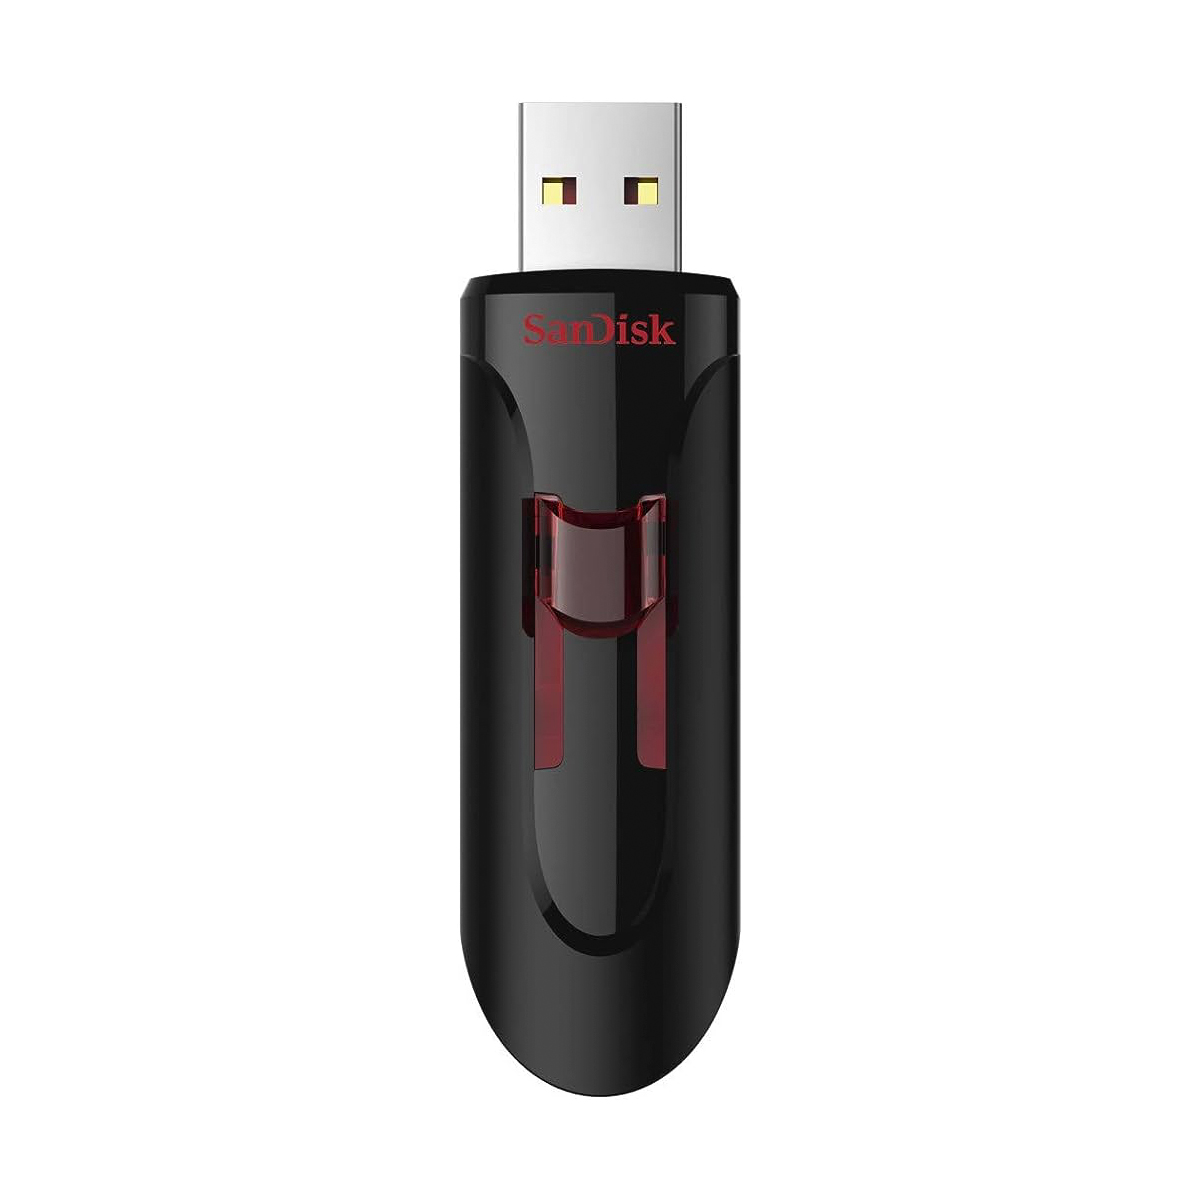 Featured image for “SanDisk サンディスク USBフラッシュメモリ Cruzer Glide USB3.0 SDCZ600-016G-G35”